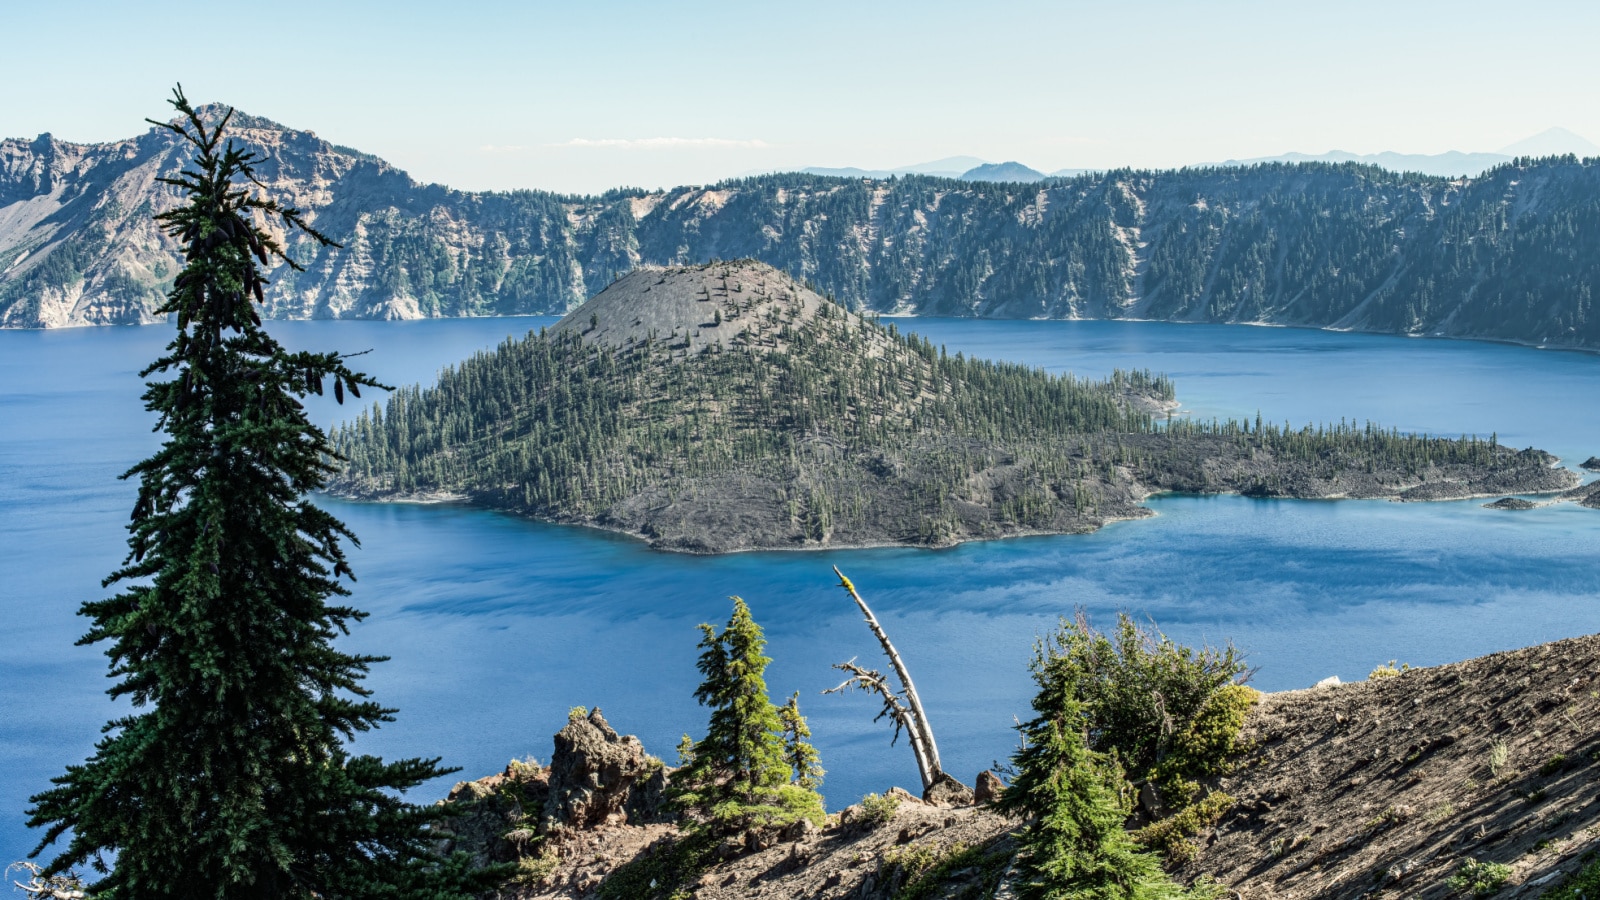 <p>Formed by the collapse of a volcanic caldera, Crater Lake is the deepest lake in the United States, known for its pristine blue waters and stunning panoramas from the rim.</p>